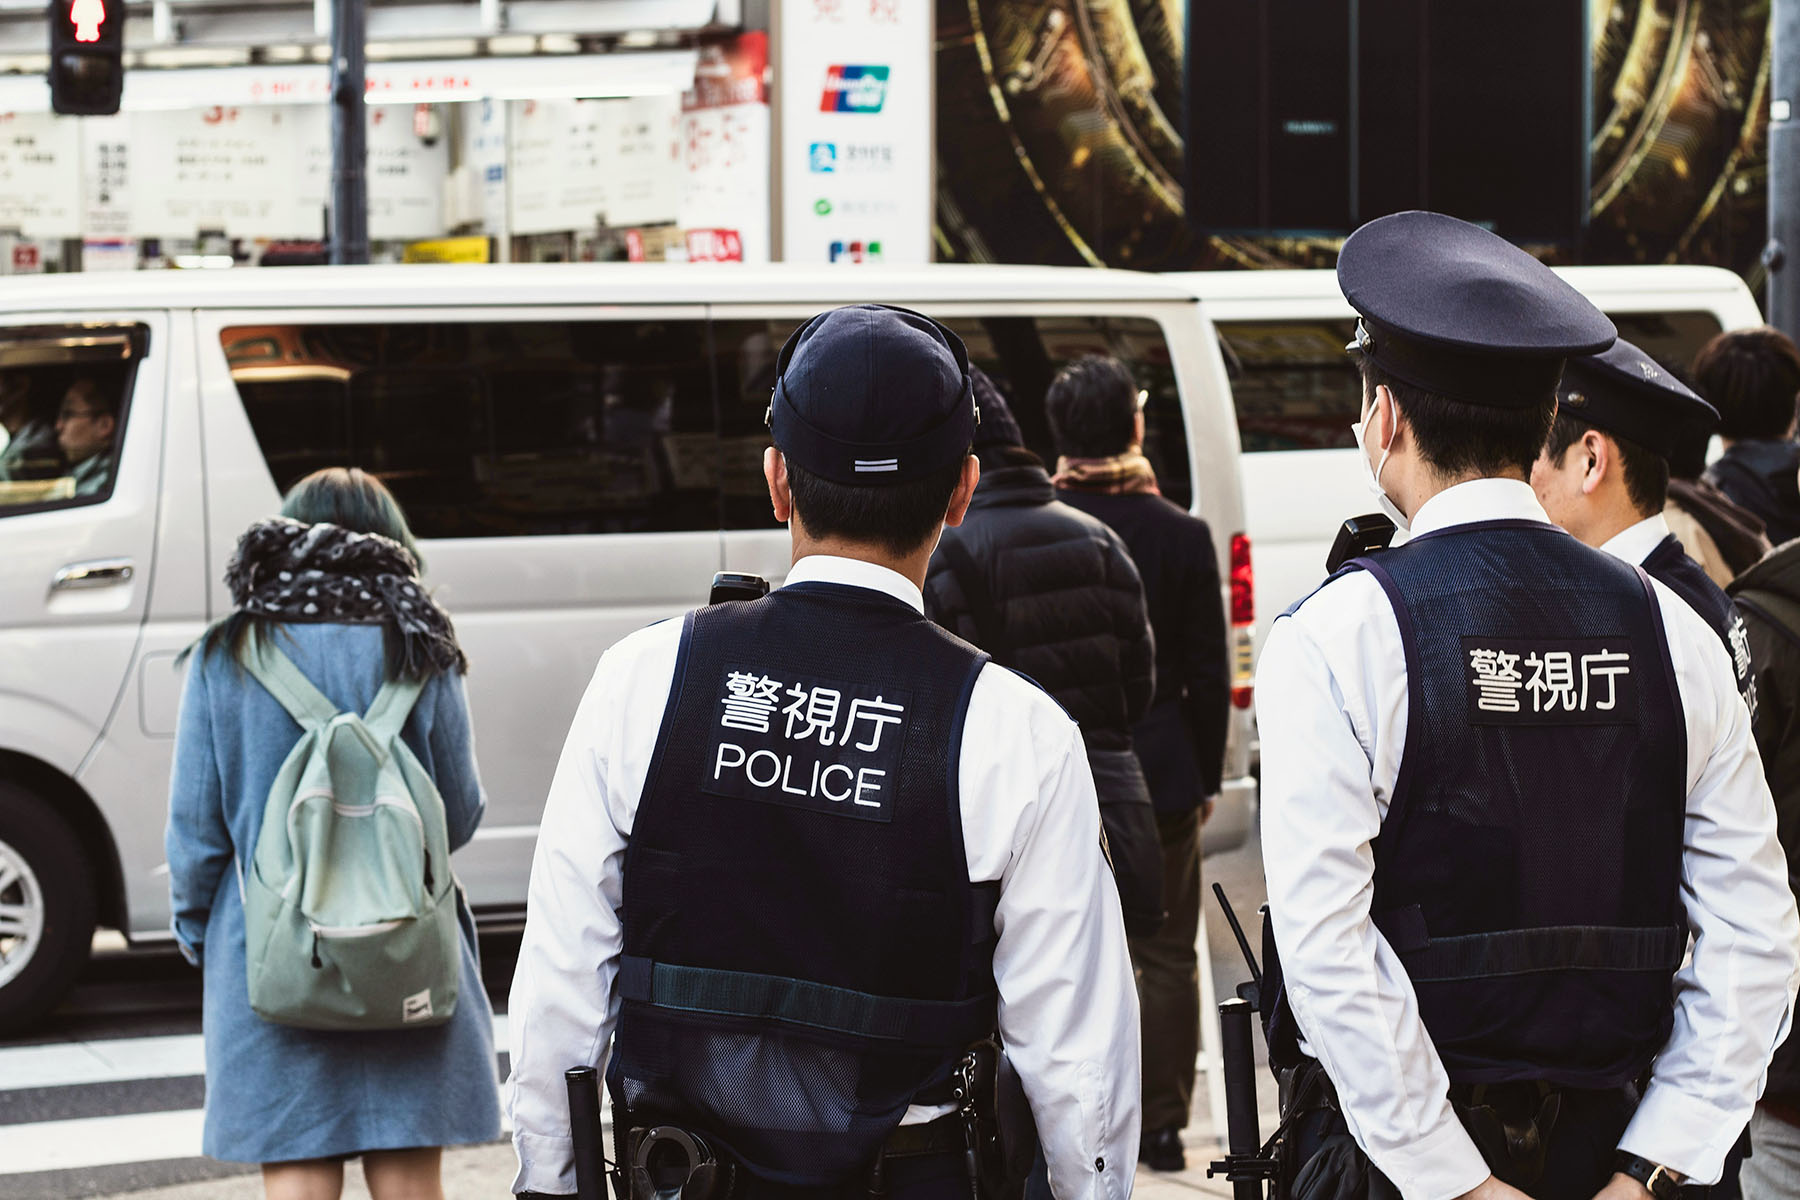 Two police officers standing on the street, with their backs turned towards the camera. They're looking at a woman with a backpack.